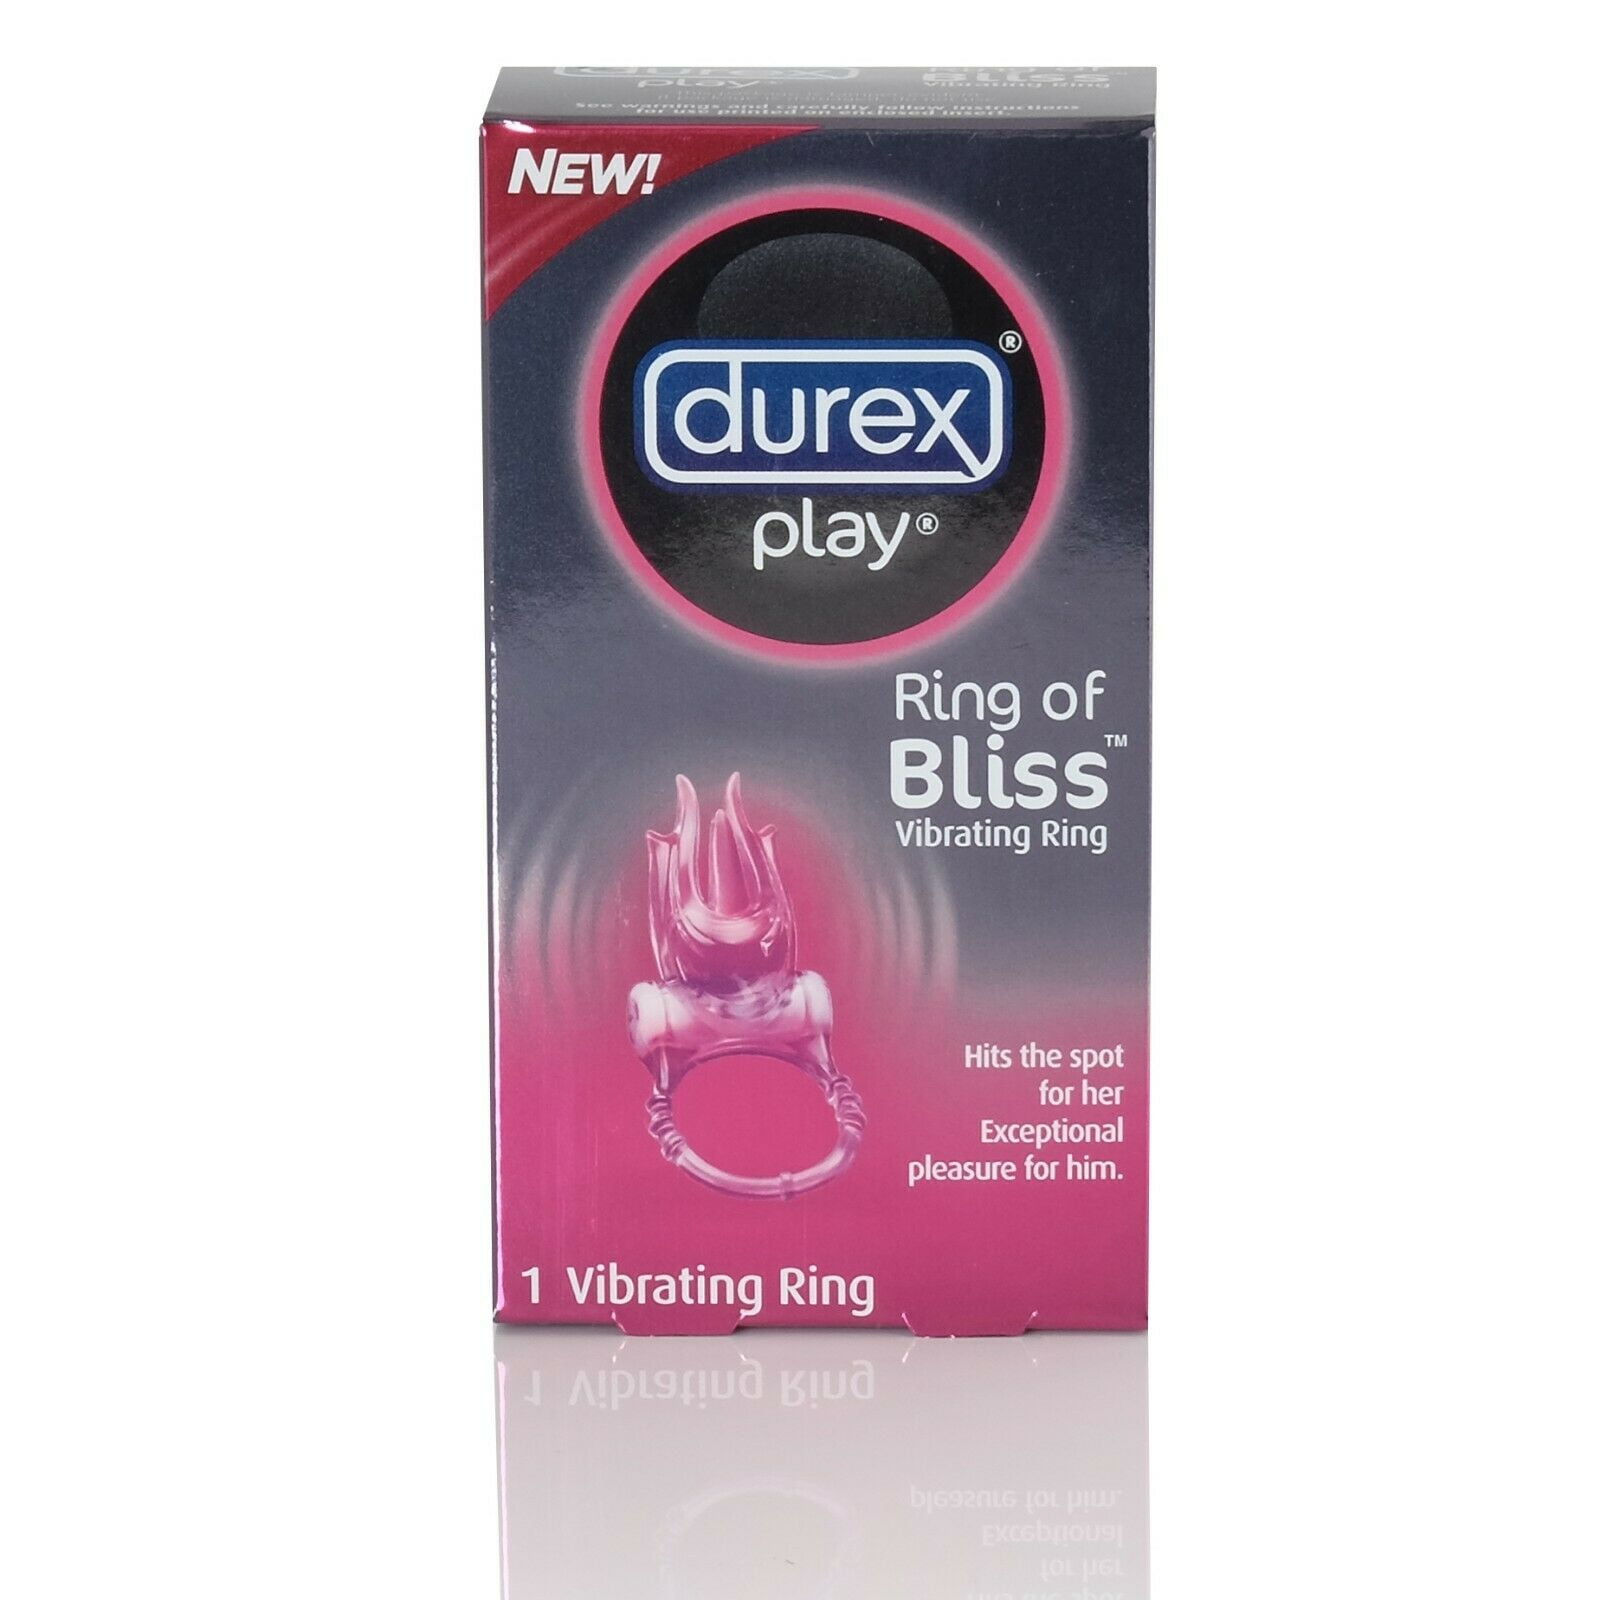 Extended Durex Play (Vibrating Ring)